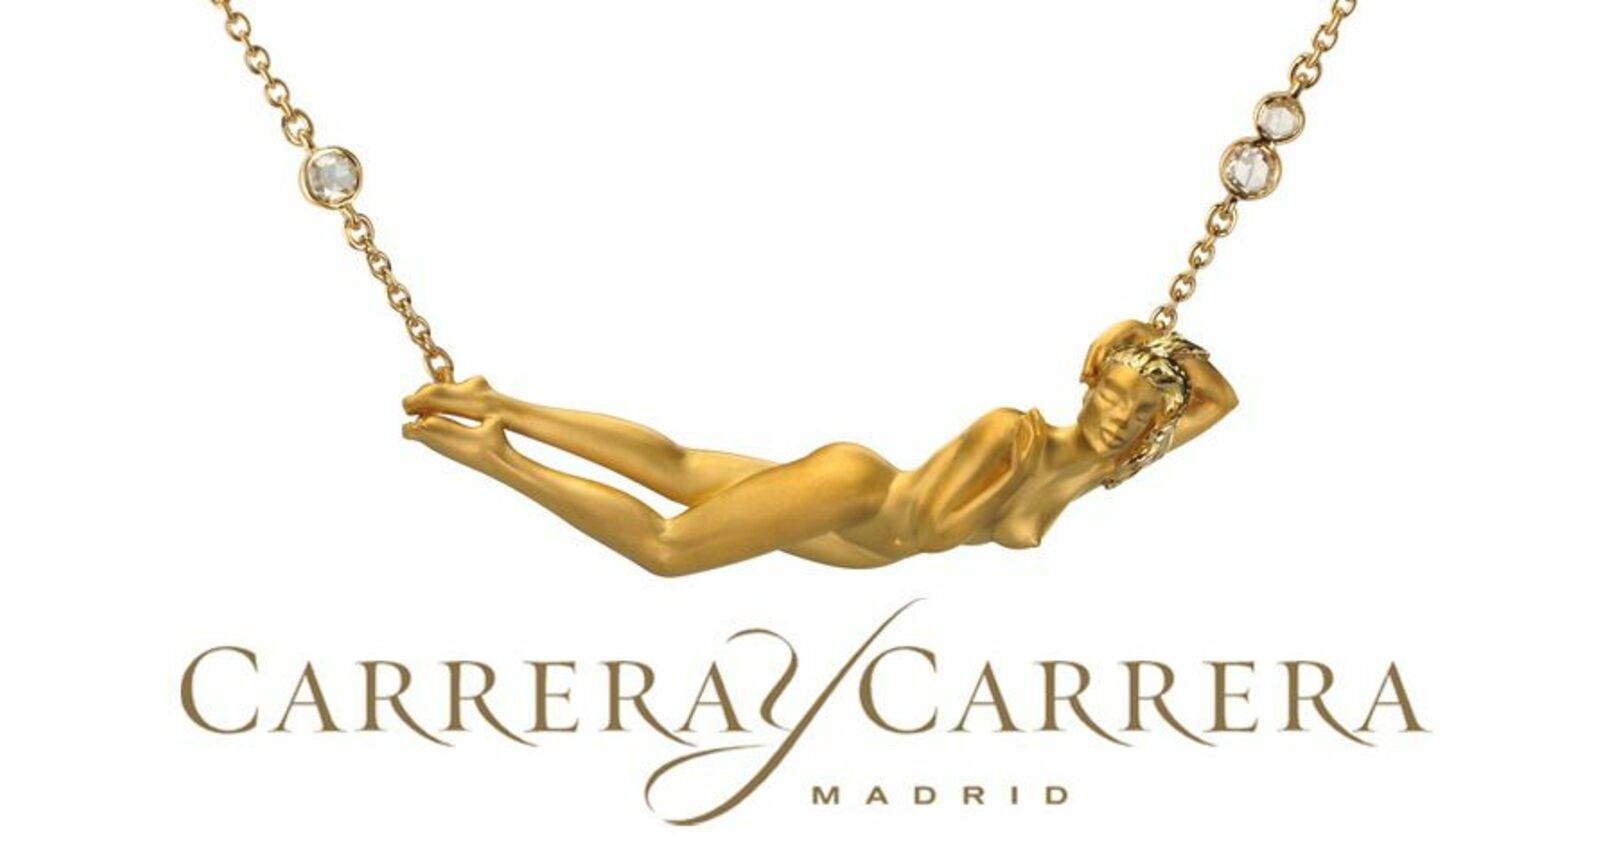 Carrera Y Carrera launched limited edition pendants